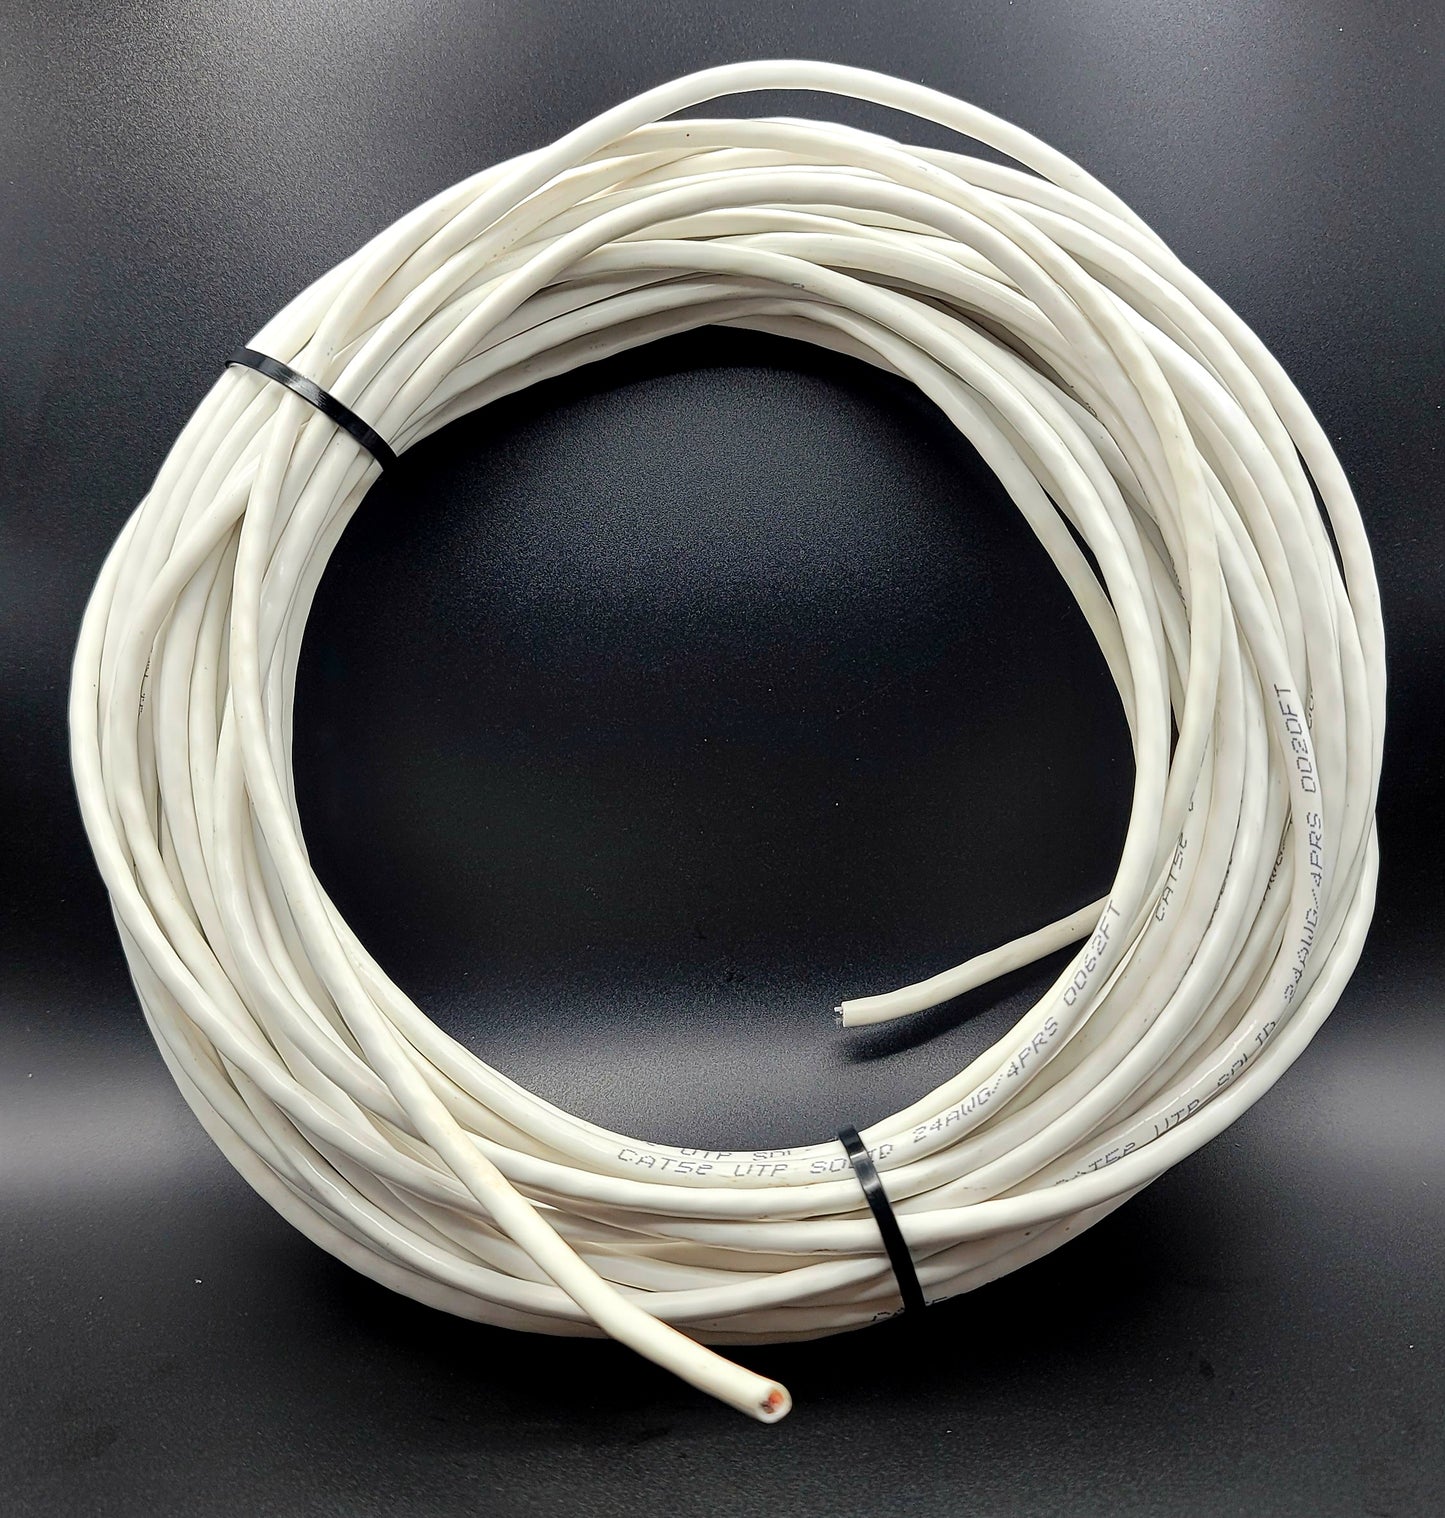 Totality Depot Bulk CAT6 Cable Indoor/Outdoor Solid Copper Ethernet Lan CCTV 10/100/1000mb 125ft 38m White